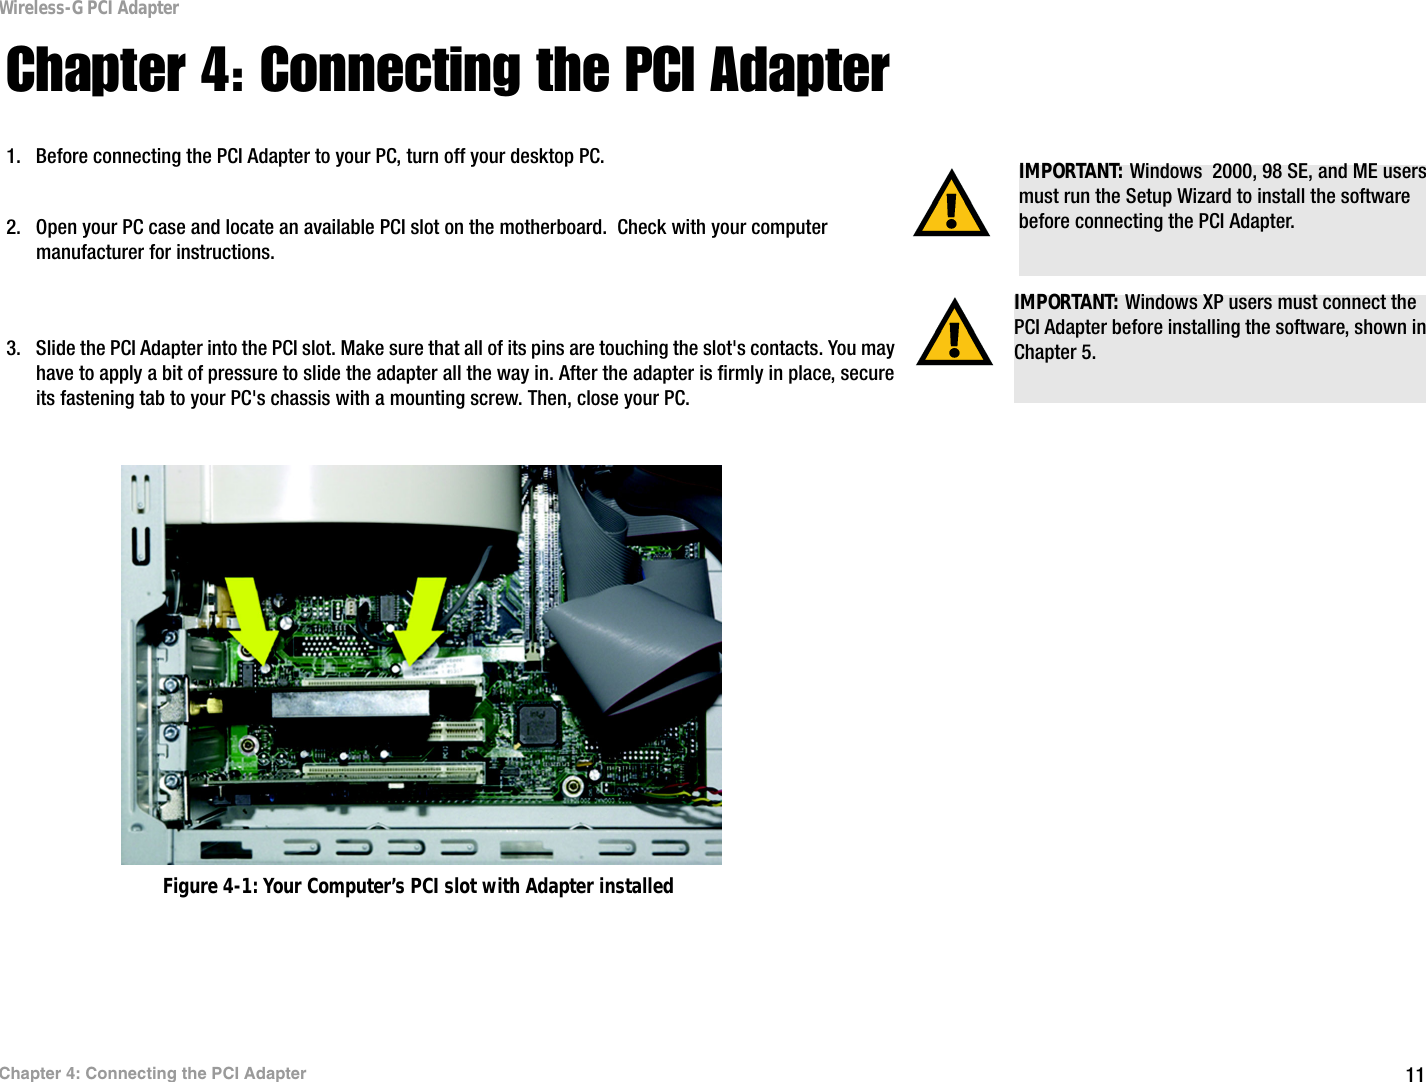 11Chapter 4: Connecting the PCI AdapterWireless-G PCI AdapterChapter 4: Connecting the PCI Adapter1. Before connecting the PCI Adapter to your PC, turn off your desktop PC.  2. Open your PC case and locate an available PCI slot on the motherboard.  Check with your computer manufacturer for instructions. 3. Slide the PCI Adapter into the PCI slot. Make sure that all of its pins are touching the slot&apos;s contacts. You may have to apply a bit of pressure to slide the adapter all the way in. After the adapter is firmly in place, secure its fastening tab to your PC&apos;s chassis with a mounting screw. Then, close your PC. IMPORTANT: Windows XP users must connect the PCI Adapter before installing the software, shown in Chapter 5.IMPORTANT: Windows  2000, 98 SE, and ME users must run the Setup Wizard to install the software before connecting the PCI Adapter.Figure 4-1: Your Computer’s PCI slot with Adapter installed